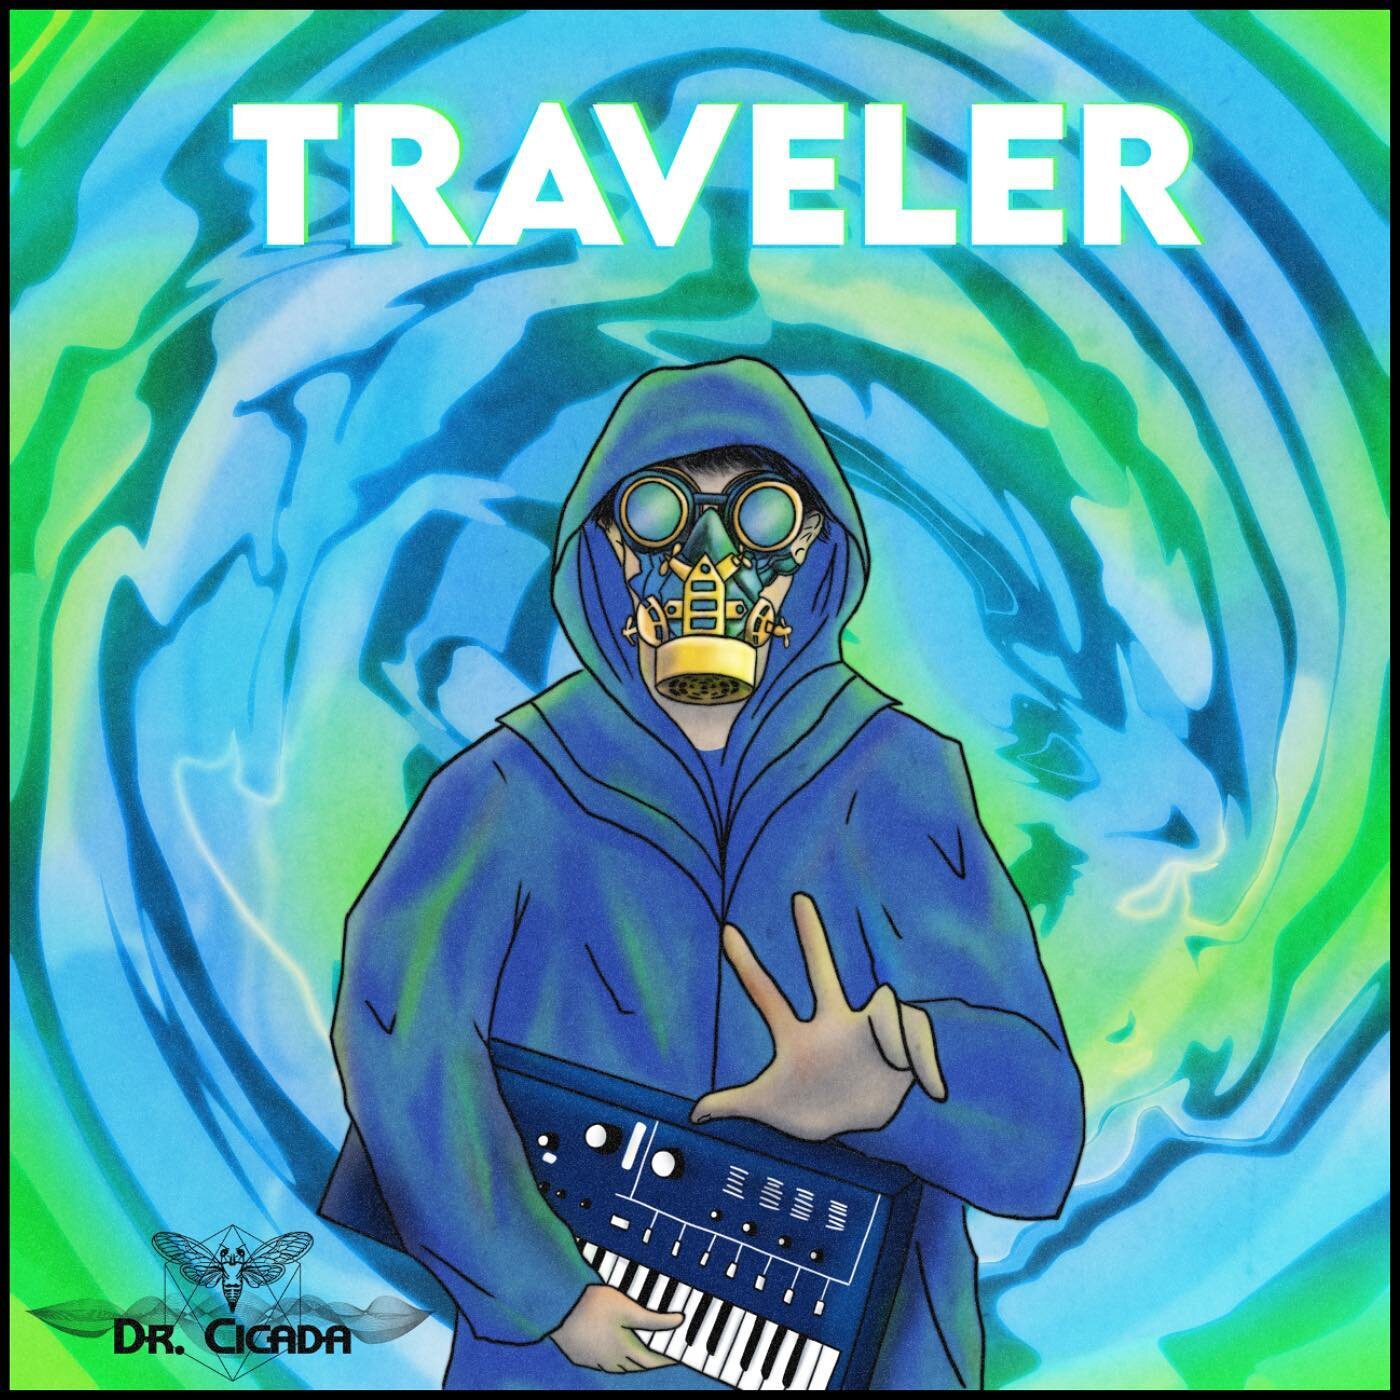 Finally, &ldquo;Traveler&rdquo; my new single is out there. You can find it in all streaming services, please share en enjoy. 

#newsong #newsingle #newmusic #electronicmusic #edmcolombia #colombianelectropicalmusic #techno #musicproducer #elektronik